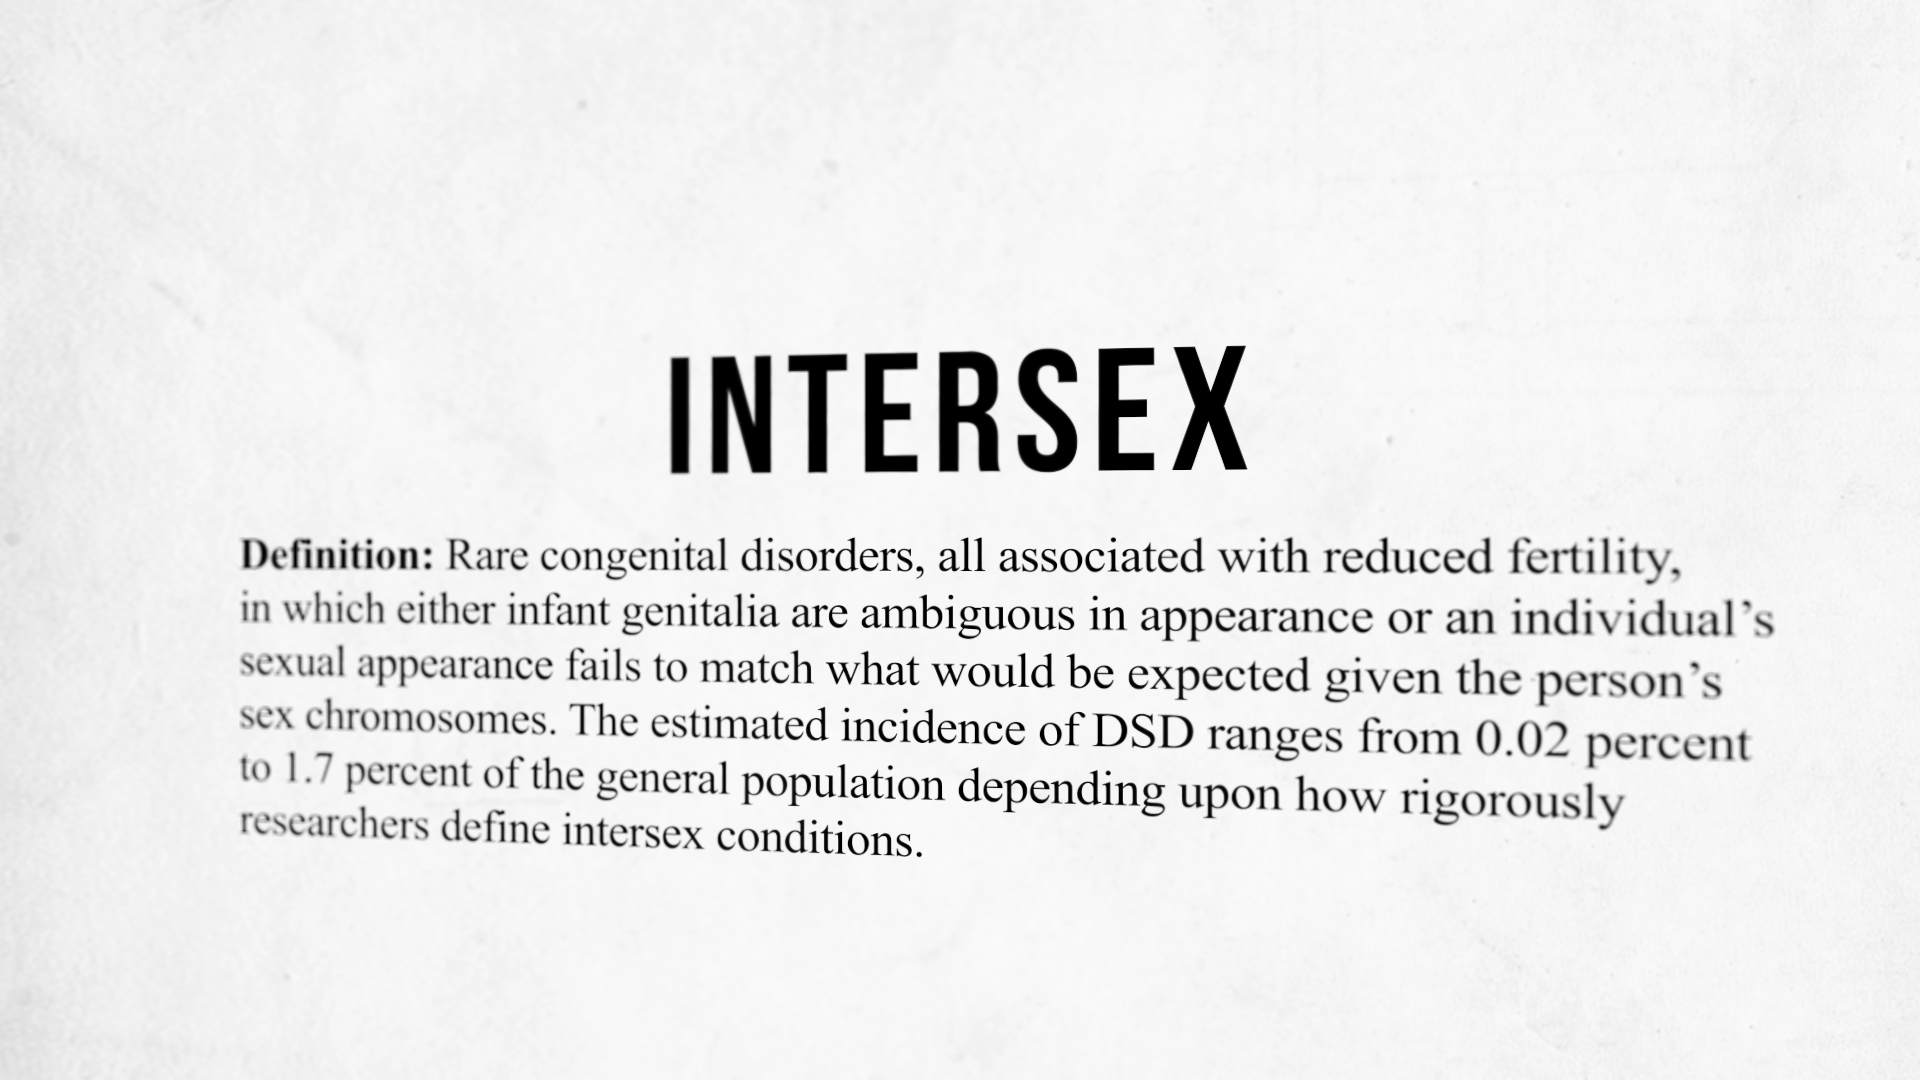 What About Intersex People?